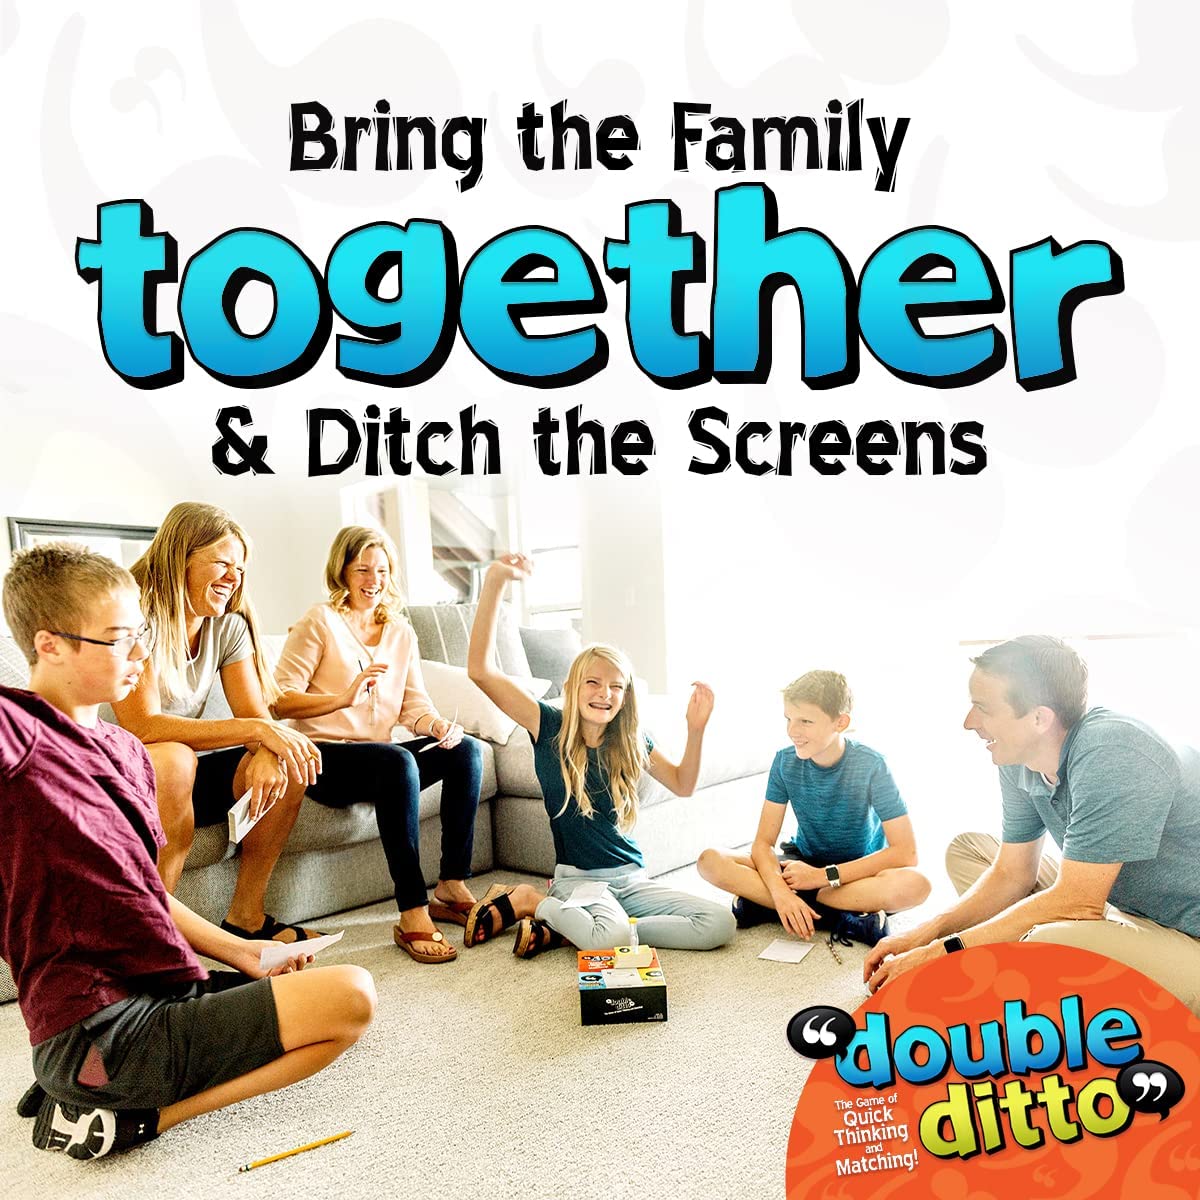 Double Ditto - A Hilarious Family Party Word Board Game - Family Games -Games for Kids Ages 8-12, Teens, & Adults - Family Games for Game Night - Family Games for Kids and Adults